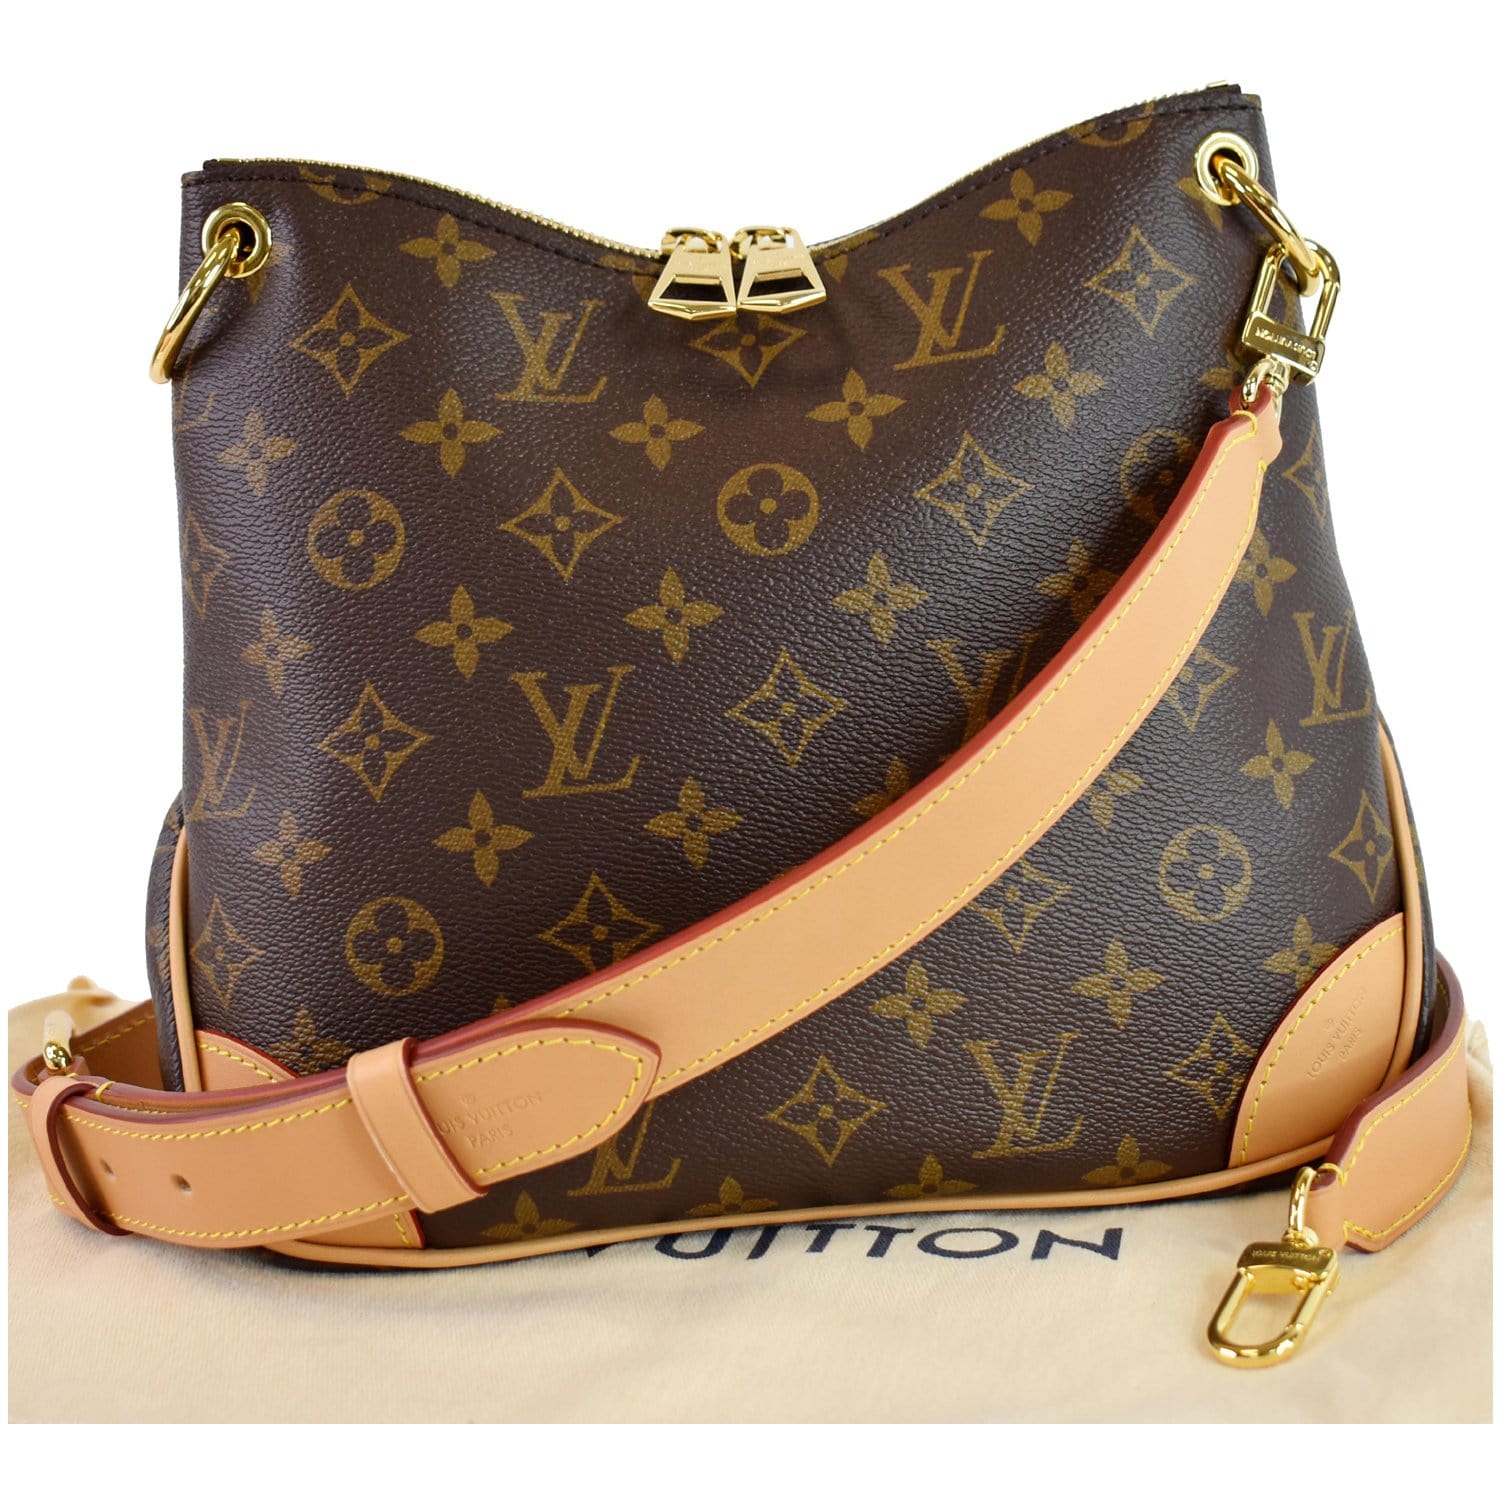 Looking for perfect street bag!!! Odeon PM/ MM??